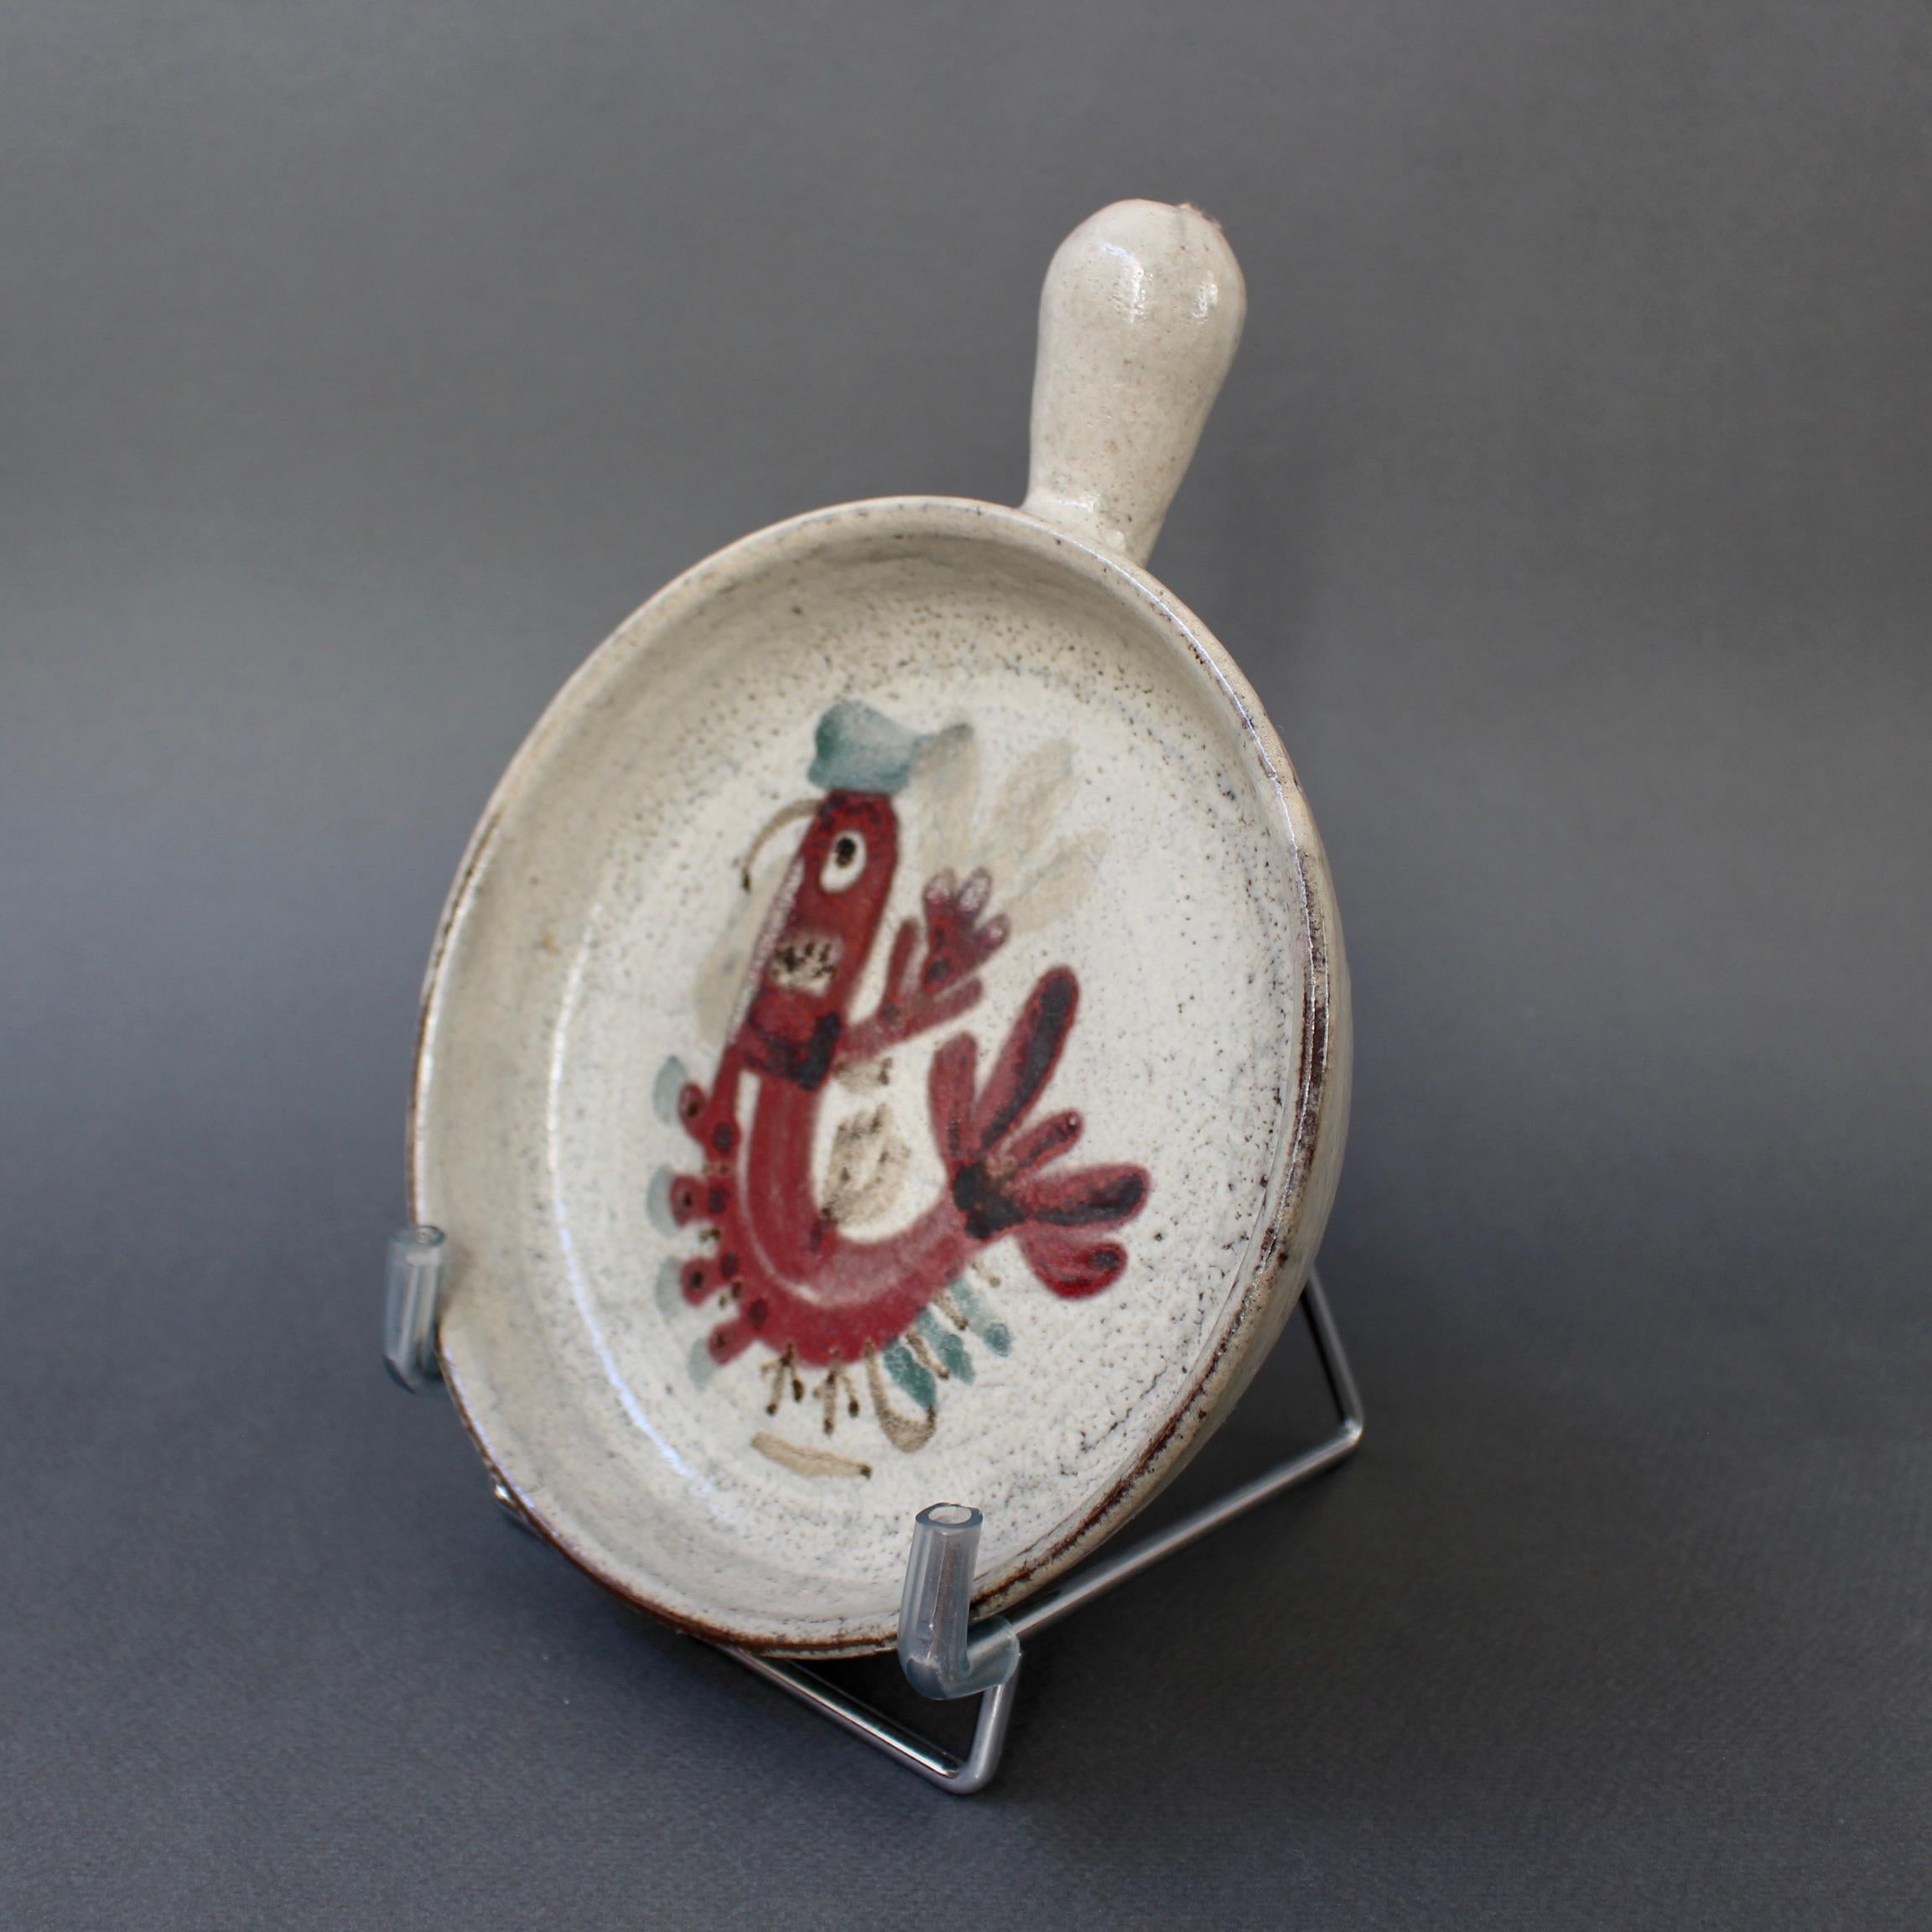 French Ceramic Decorative Serving Dish by Gustave Reynaud, Le Mûrier, c. 1960s For Sale 1